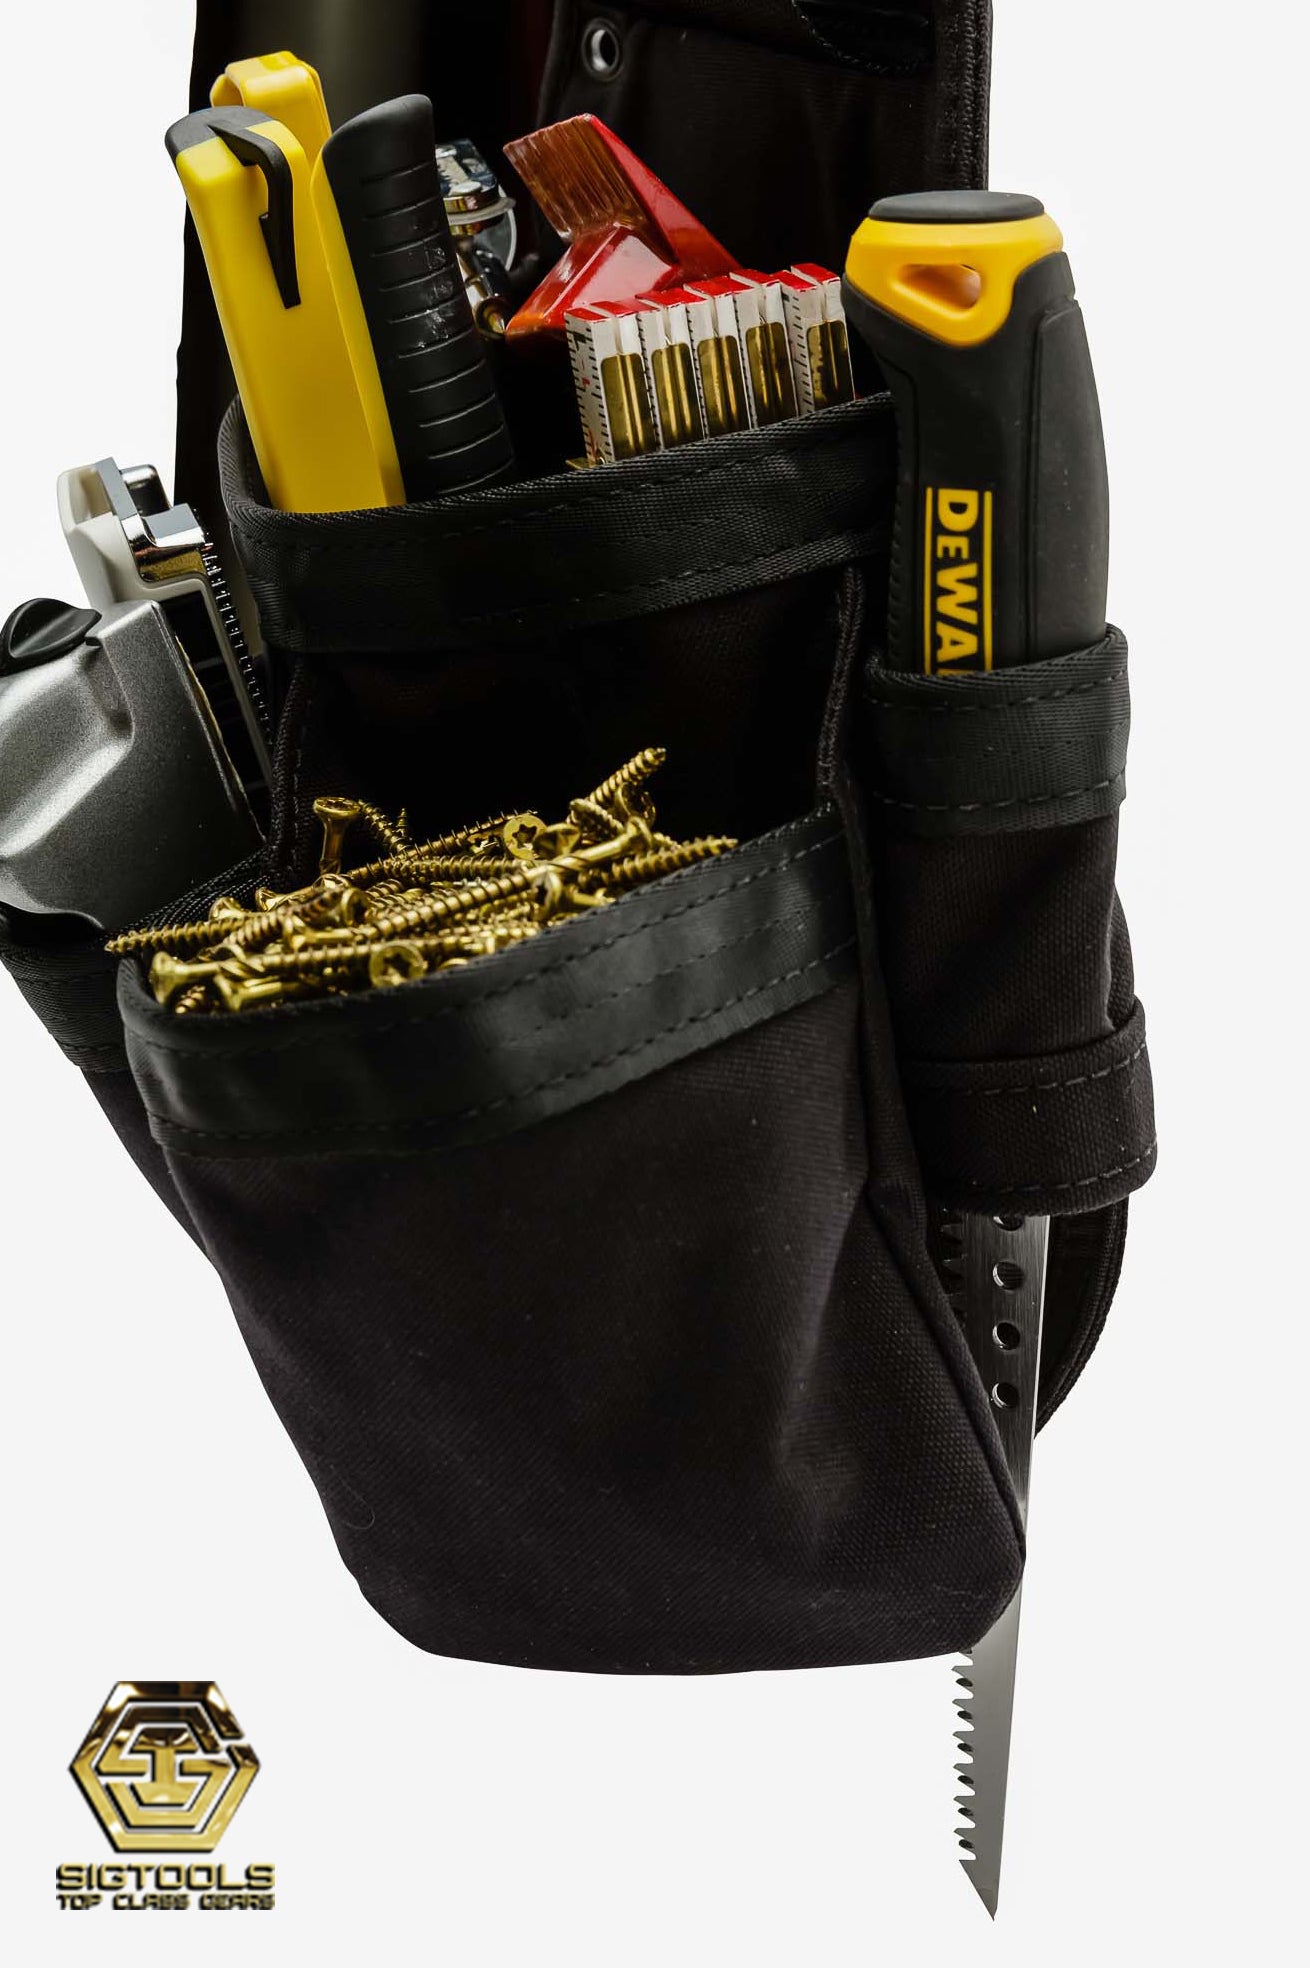 "Diamondback Axe Tool Pouch in Black - Loaded with Tools - Left Side Detail View"